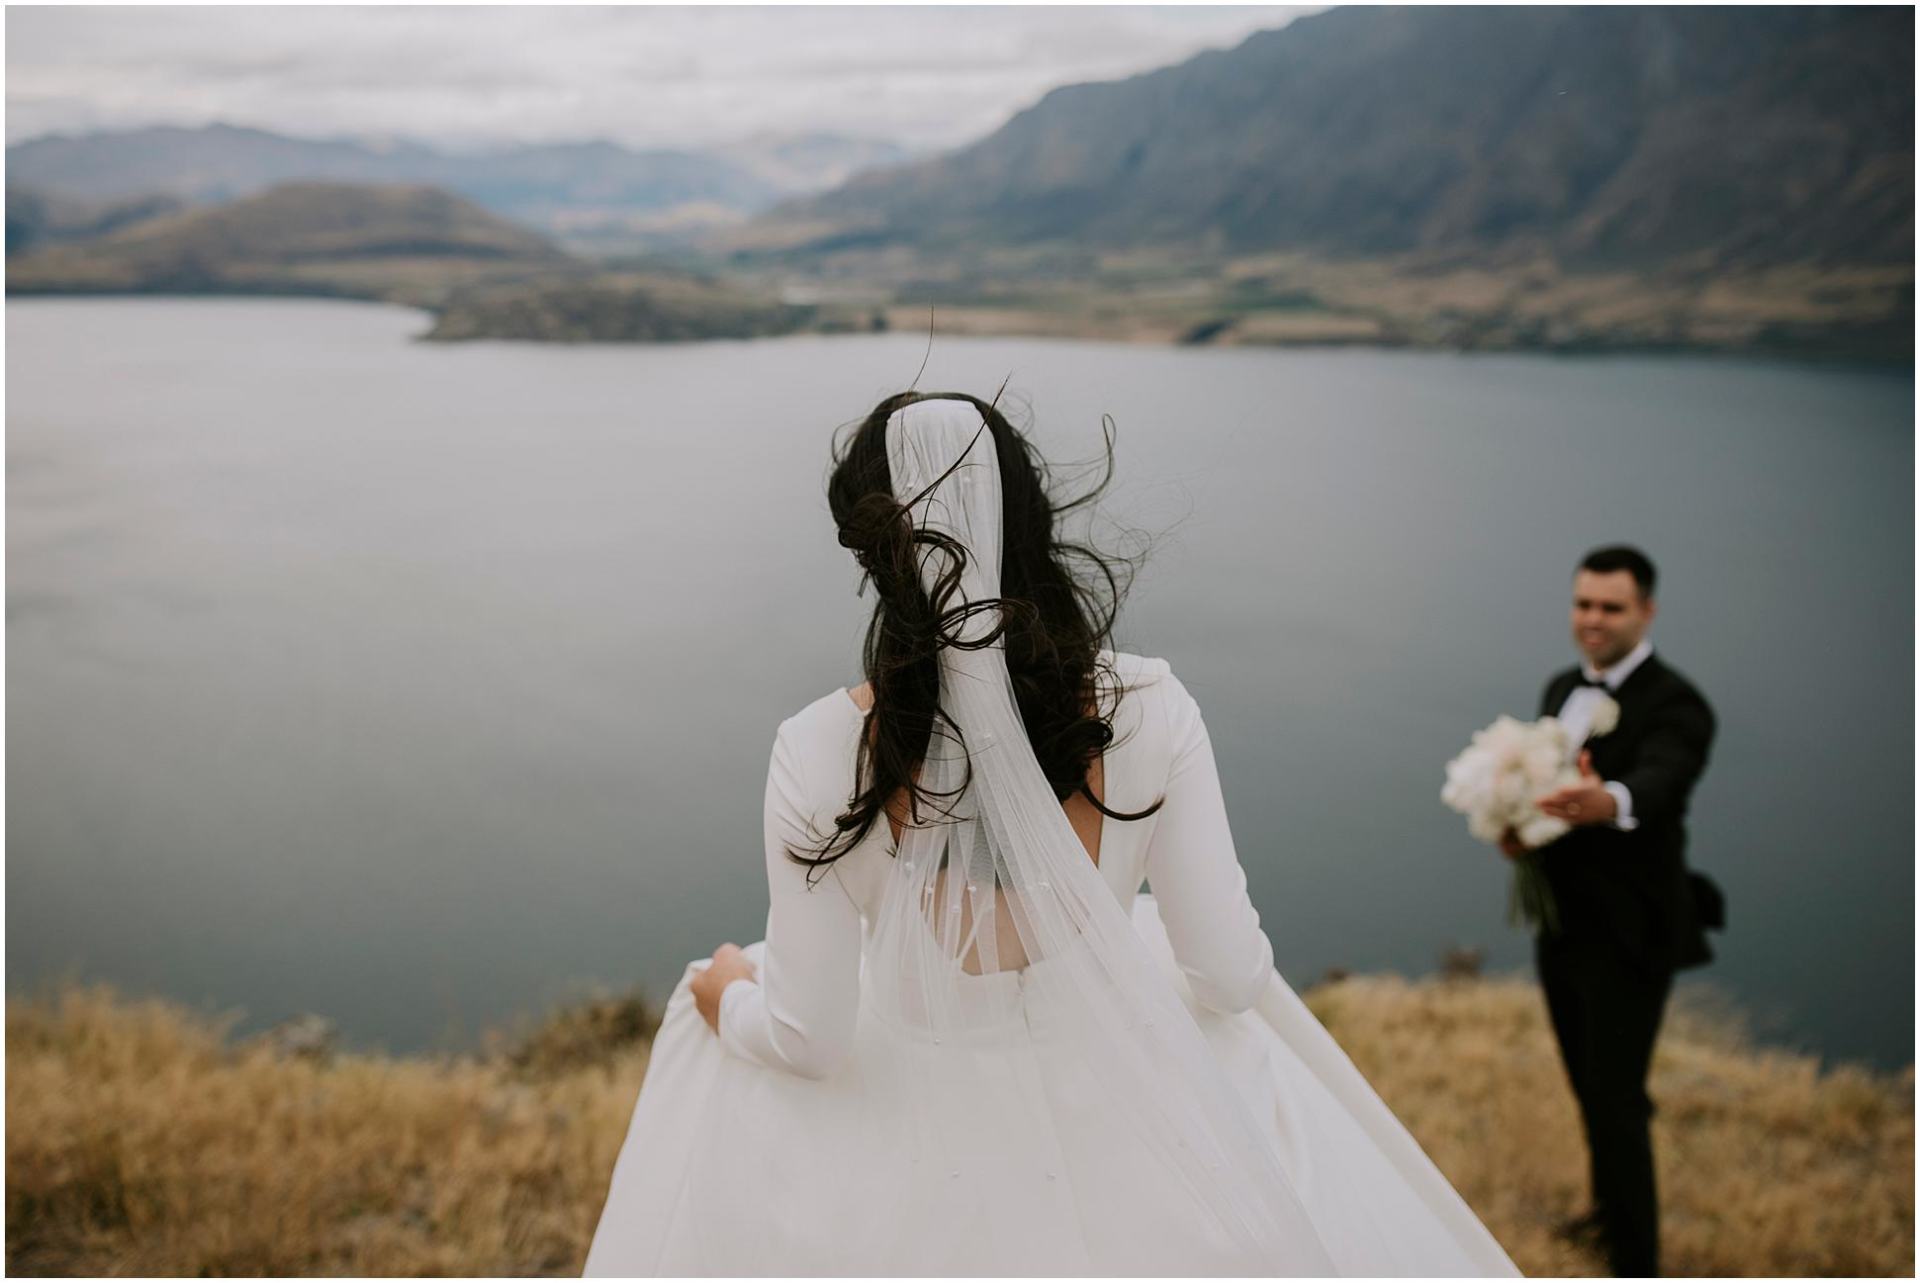 Charlotte Kiri Photography - Wedding Photography of a bride wearing an elegant low-back dress and sheer veil with pearls walking towards her groom as he holds her bouquet of white flowers and waits on the edge of a peak, with glacial lakes and mountains behind in Wanaka, New Zealand.